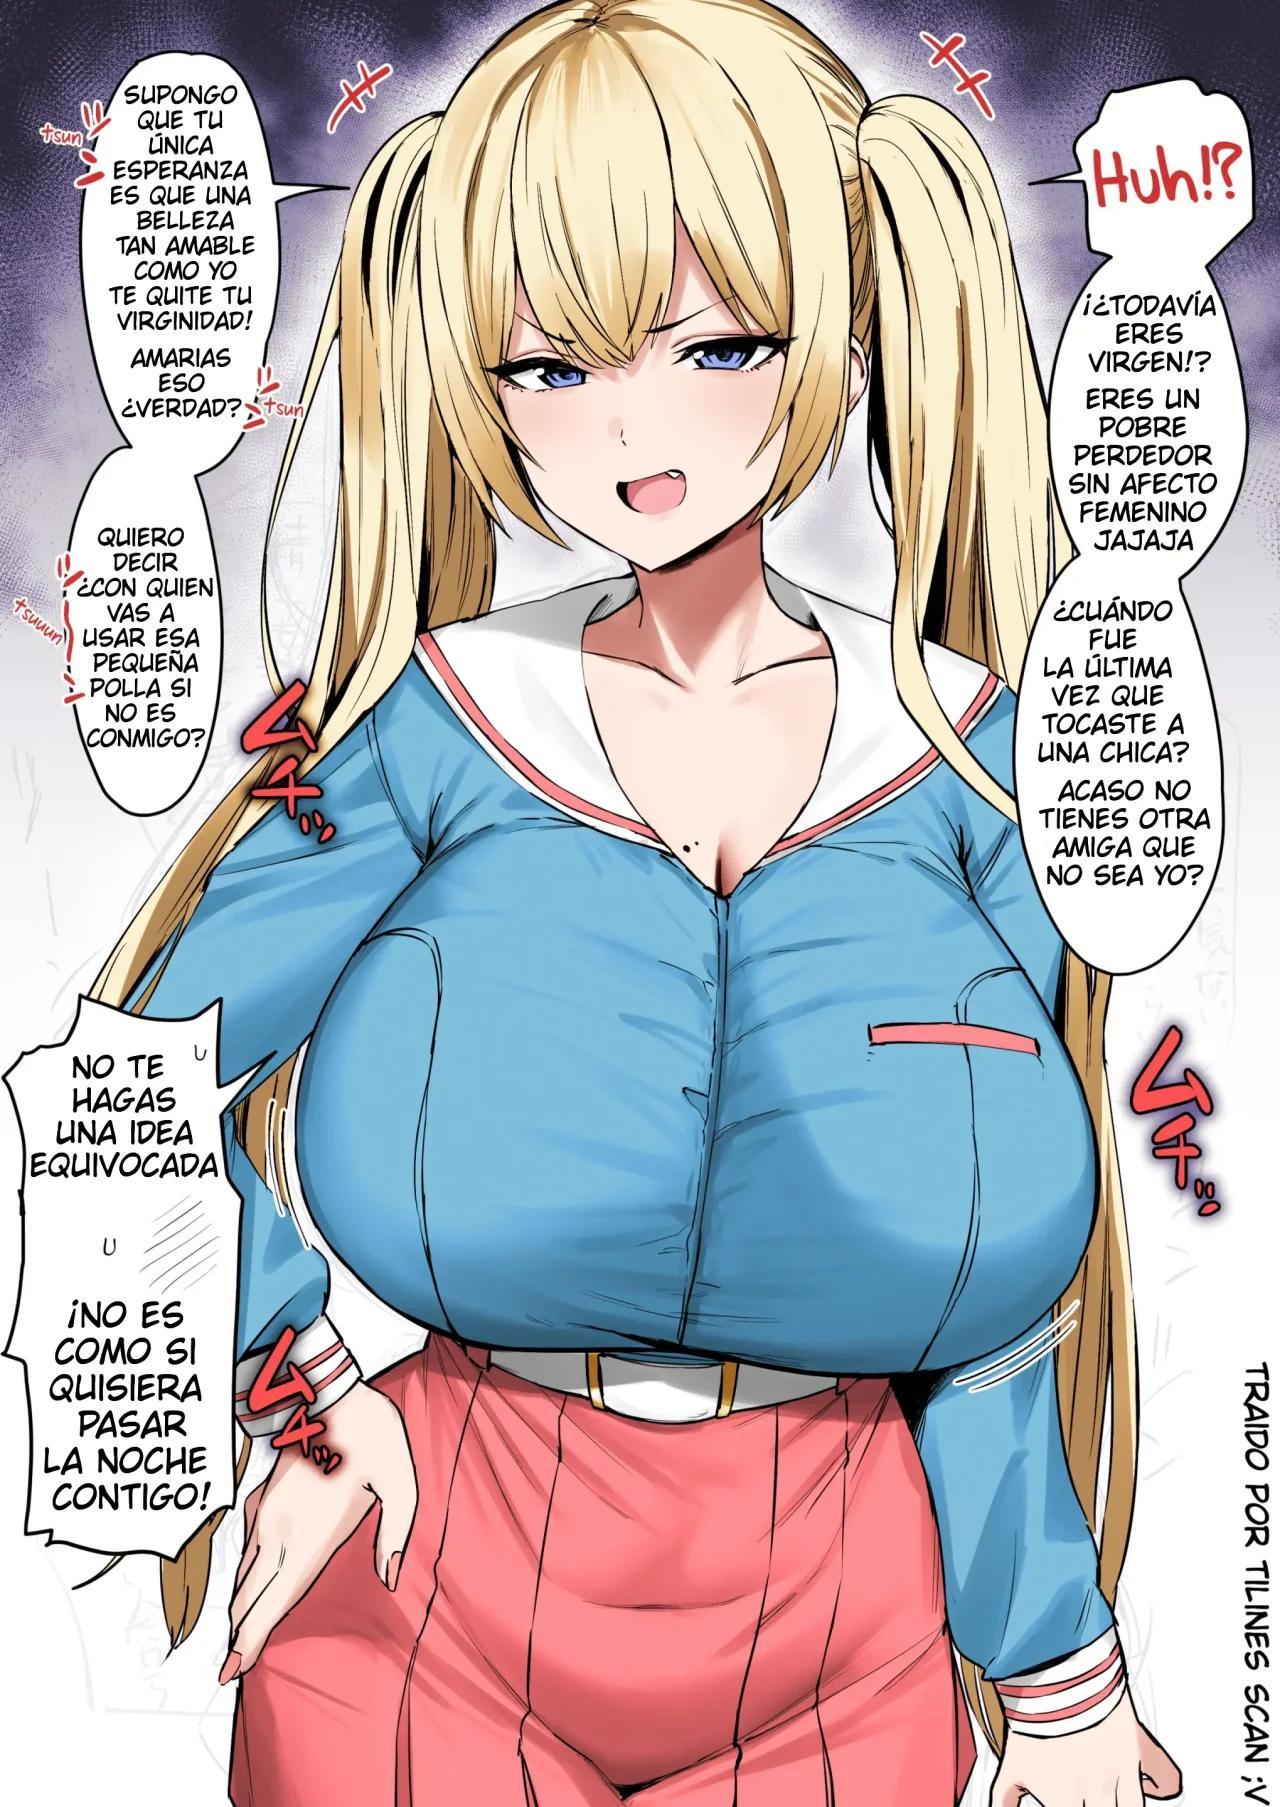 Tsuper Tsundere Twintail Blonde Mistakes You As A Virgin - Color - 0